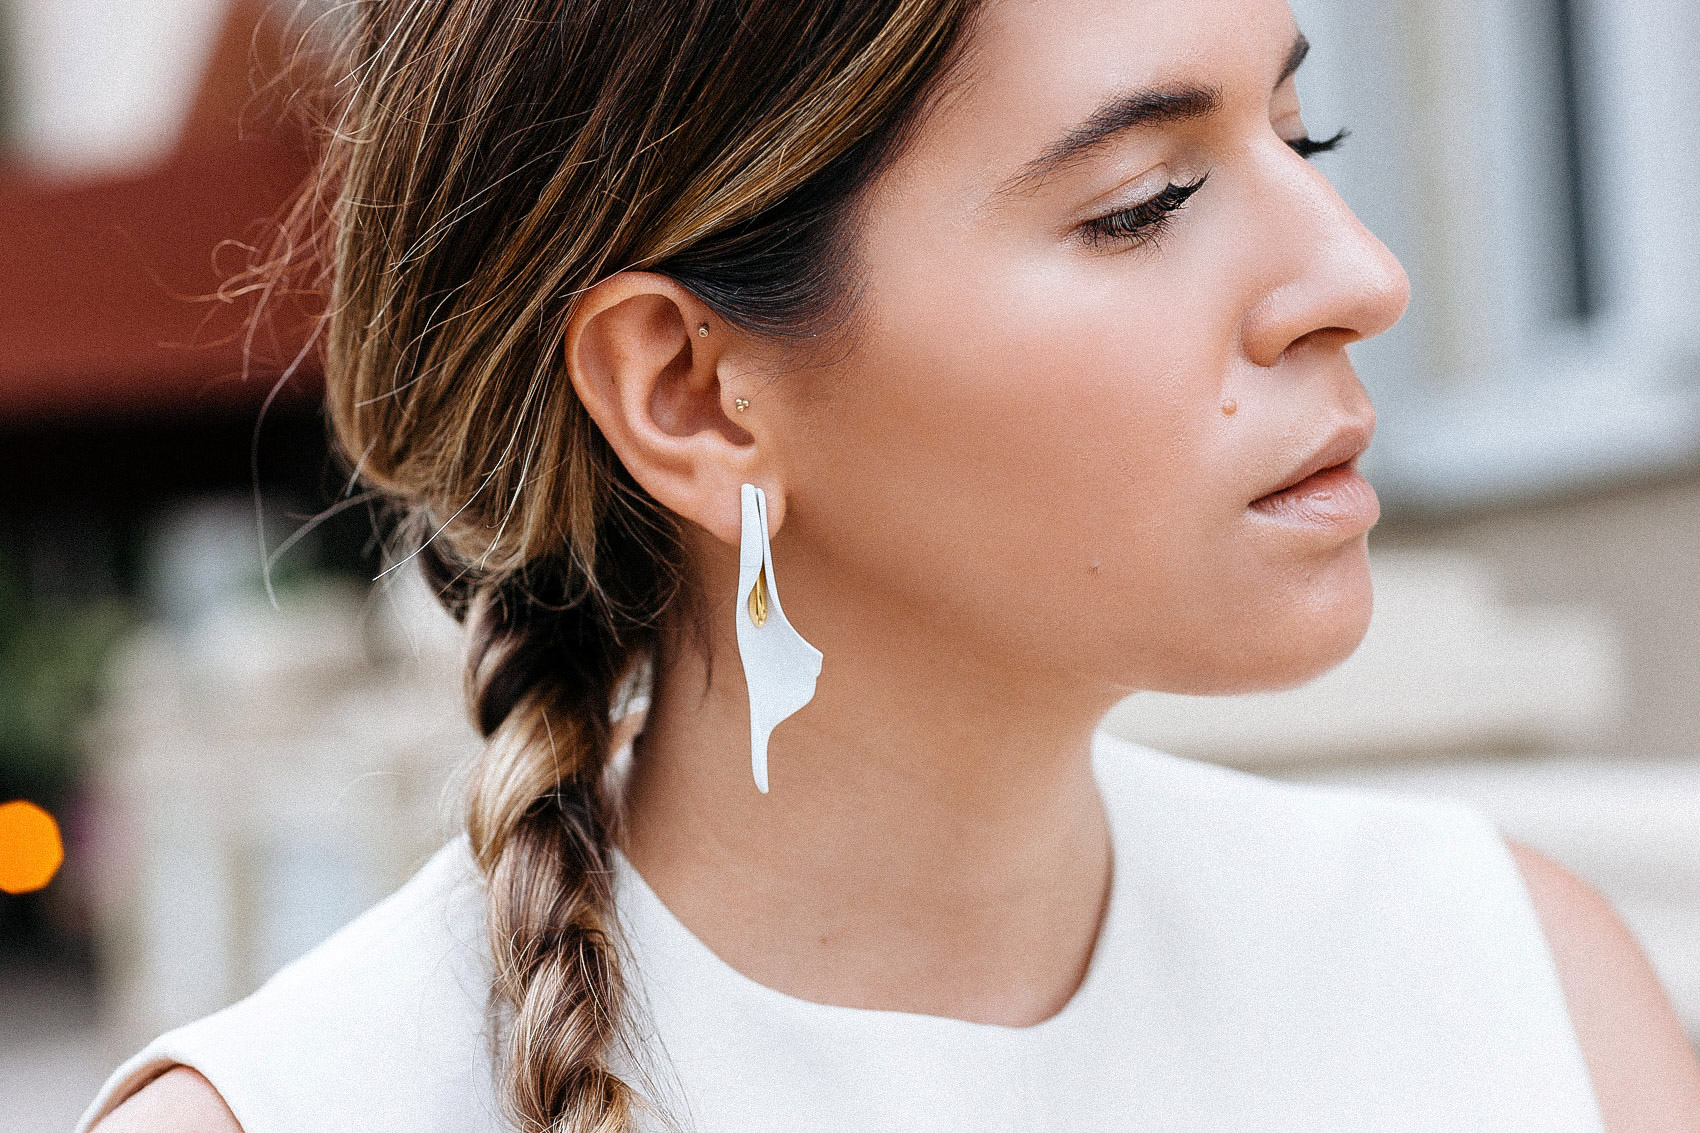 Maristella wears Calla lily earrings from Purificacion Garcia, floral statement jewelry, minimalist jewelry, sculptural earrings jewelry